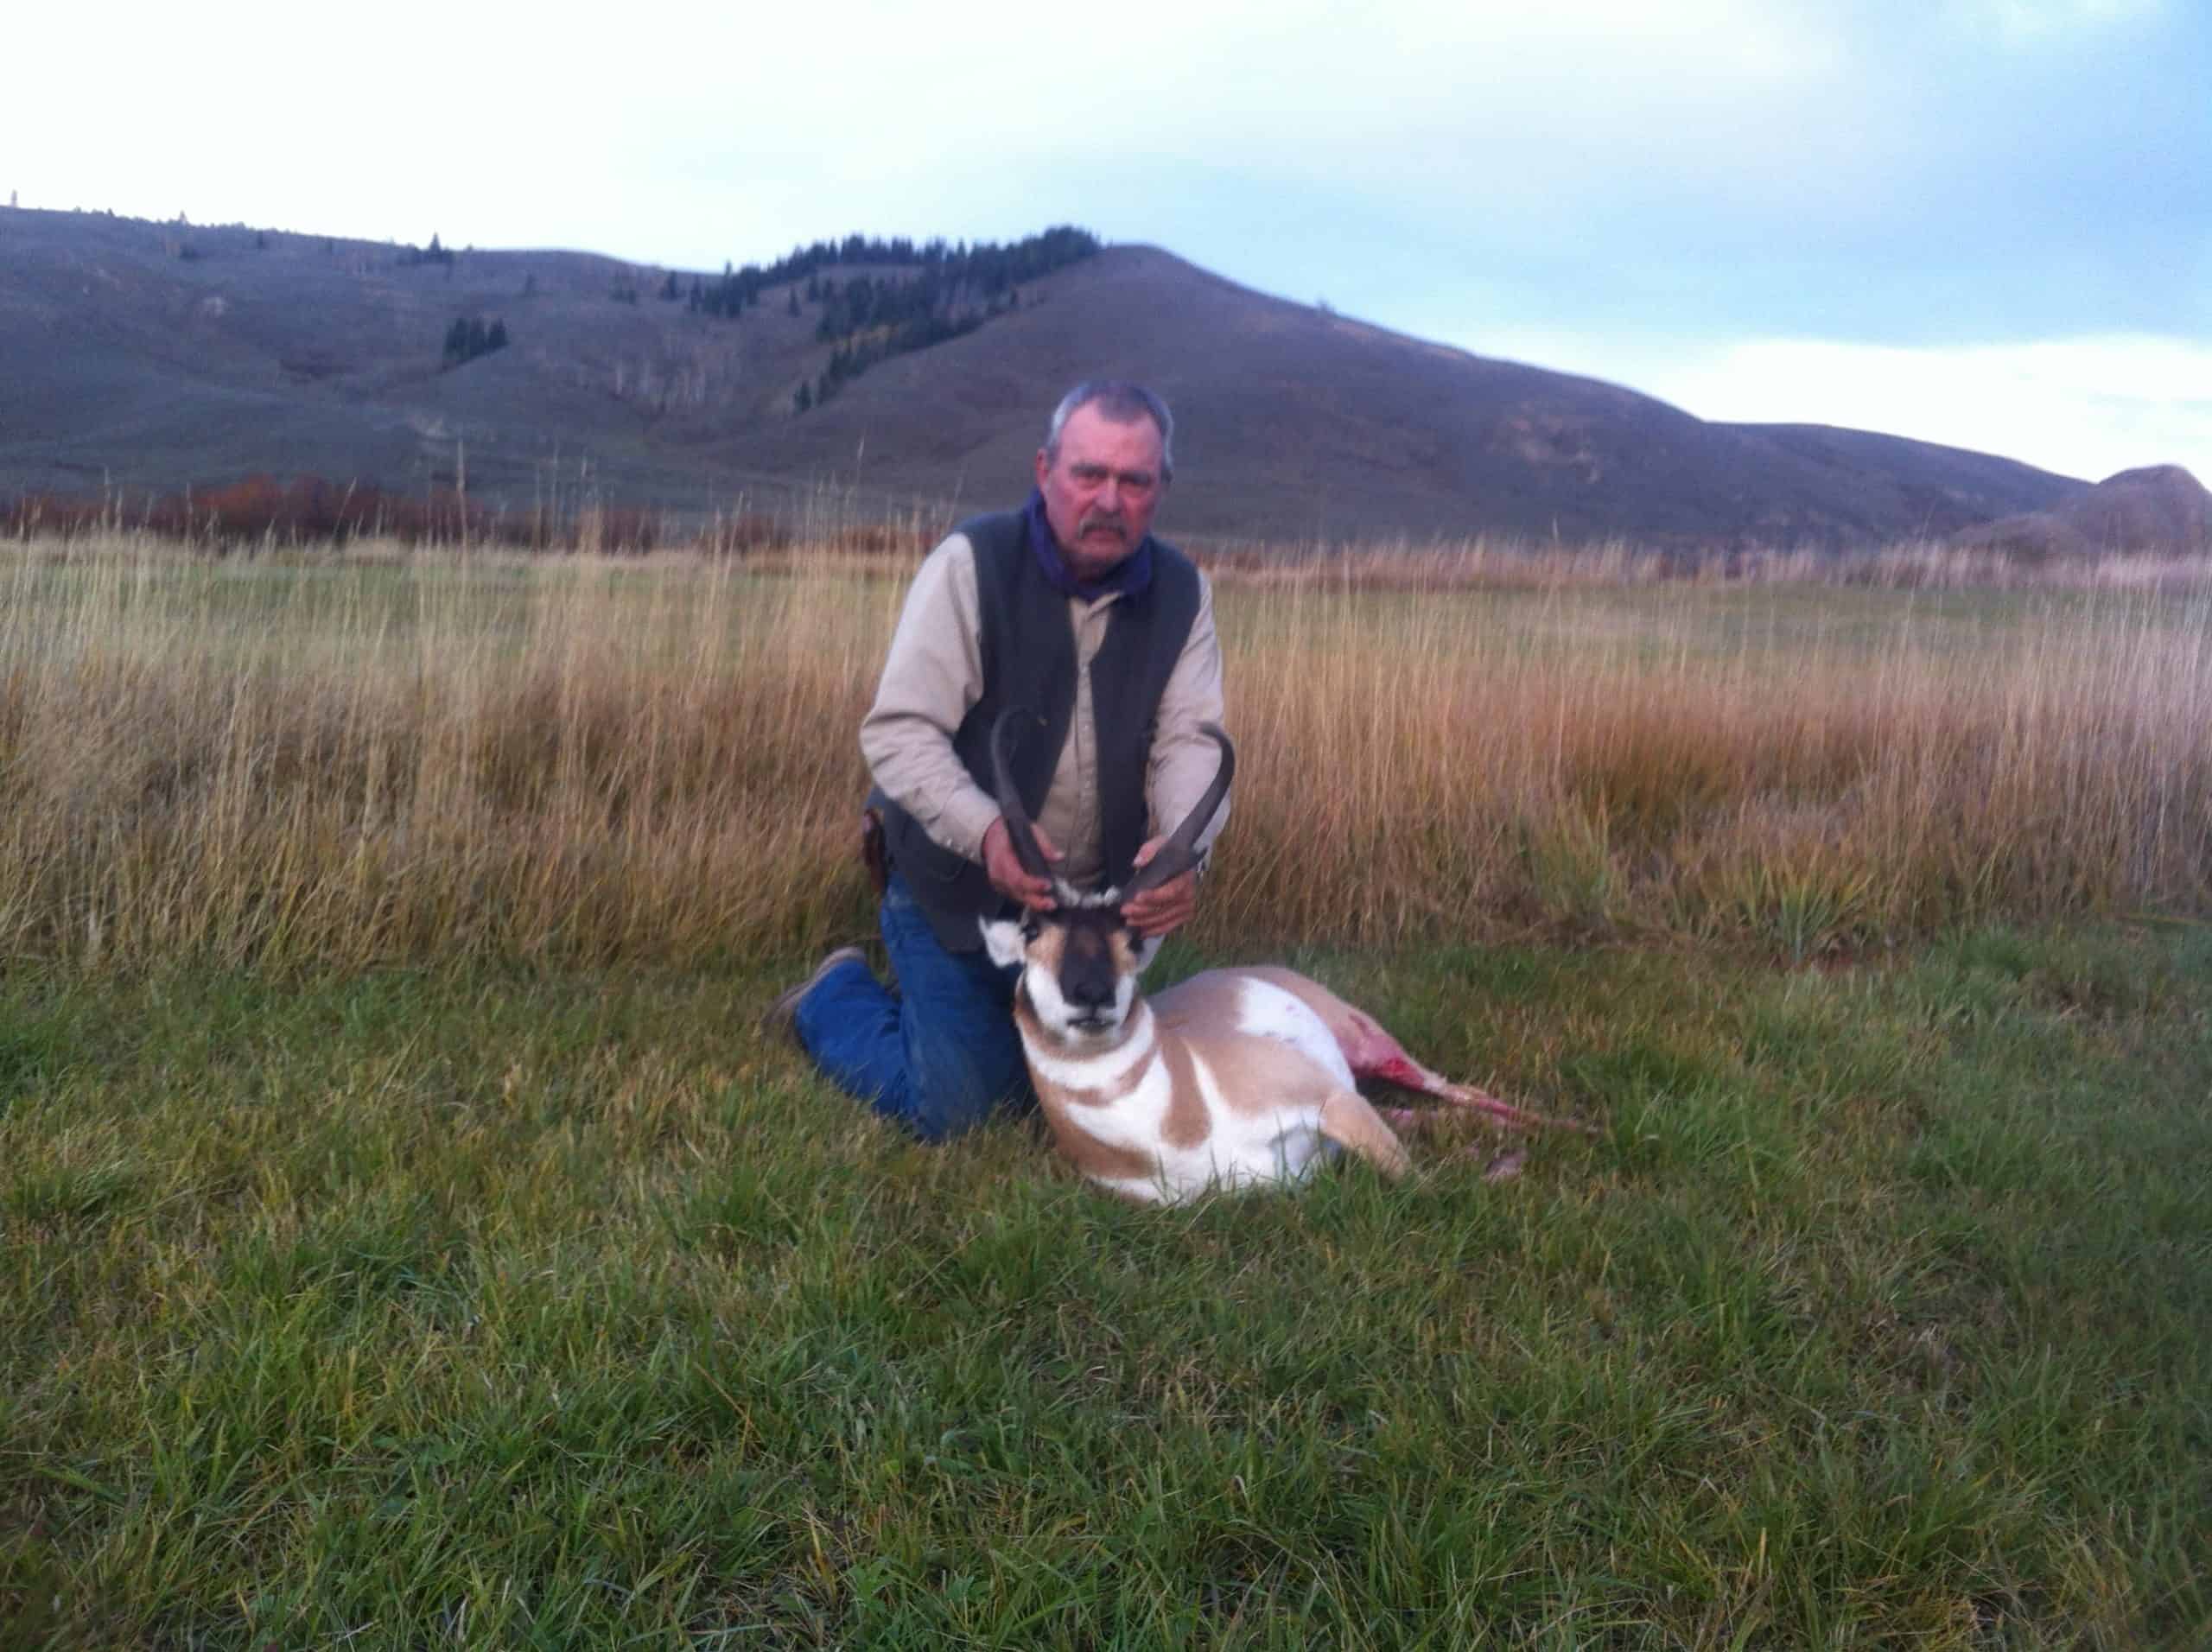 Wyoming Antelope Hunt Outfitters